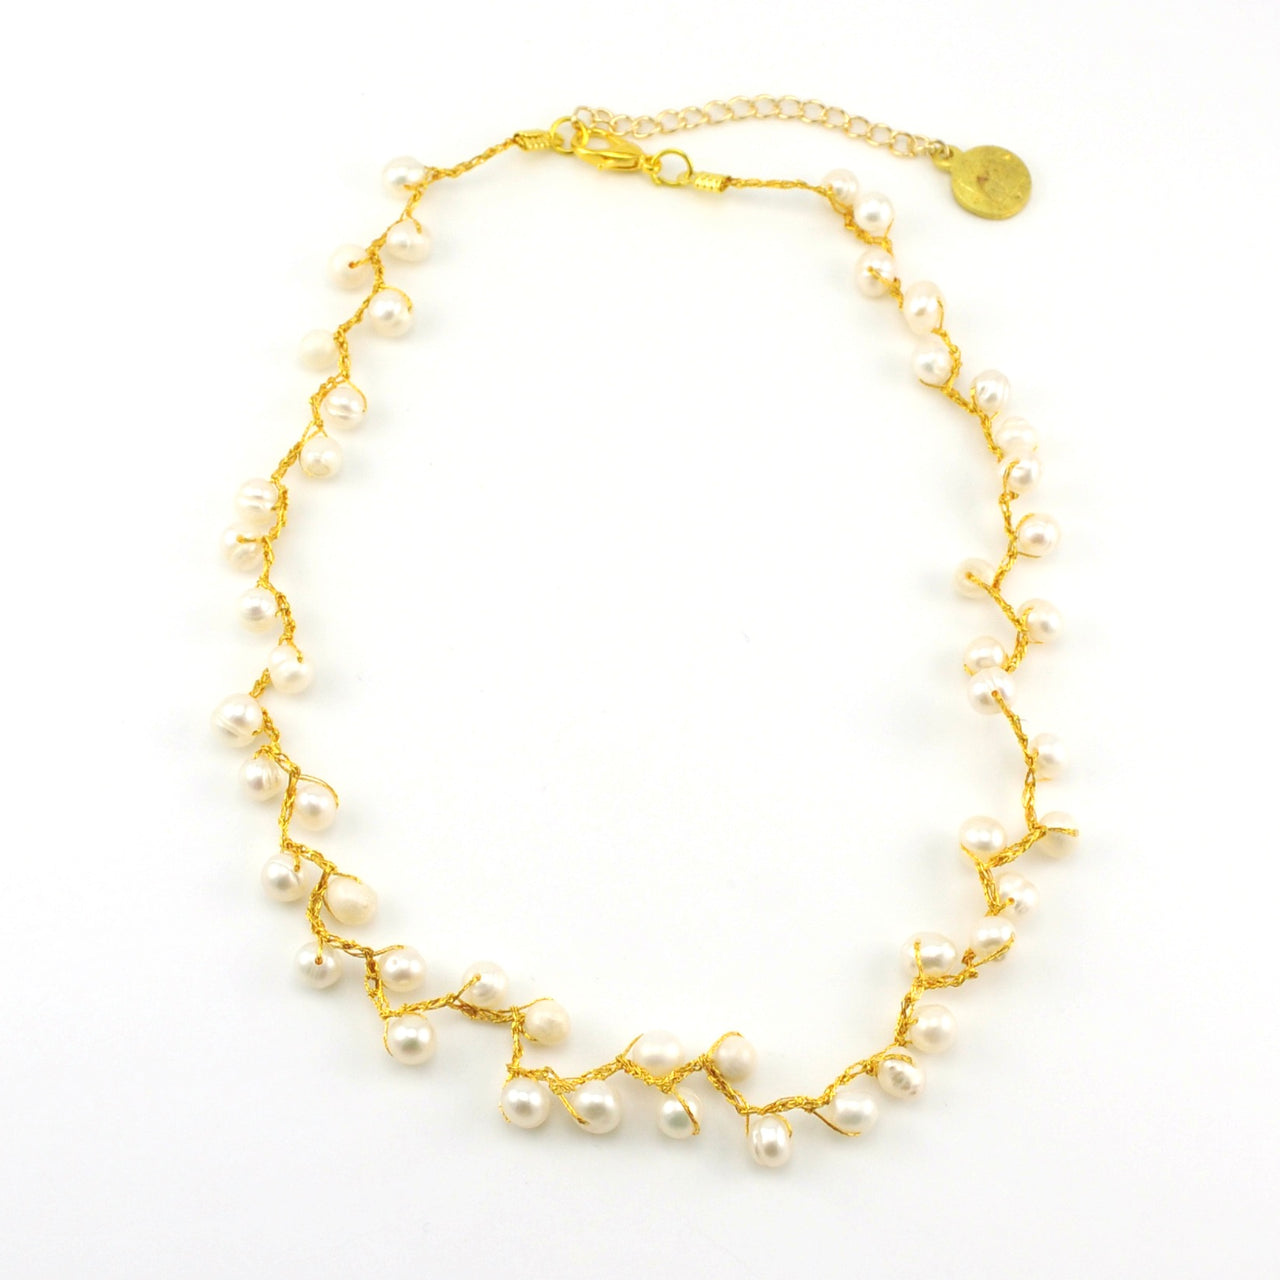 Gold Japanese Silk White Pearl 16 Inch Necklace